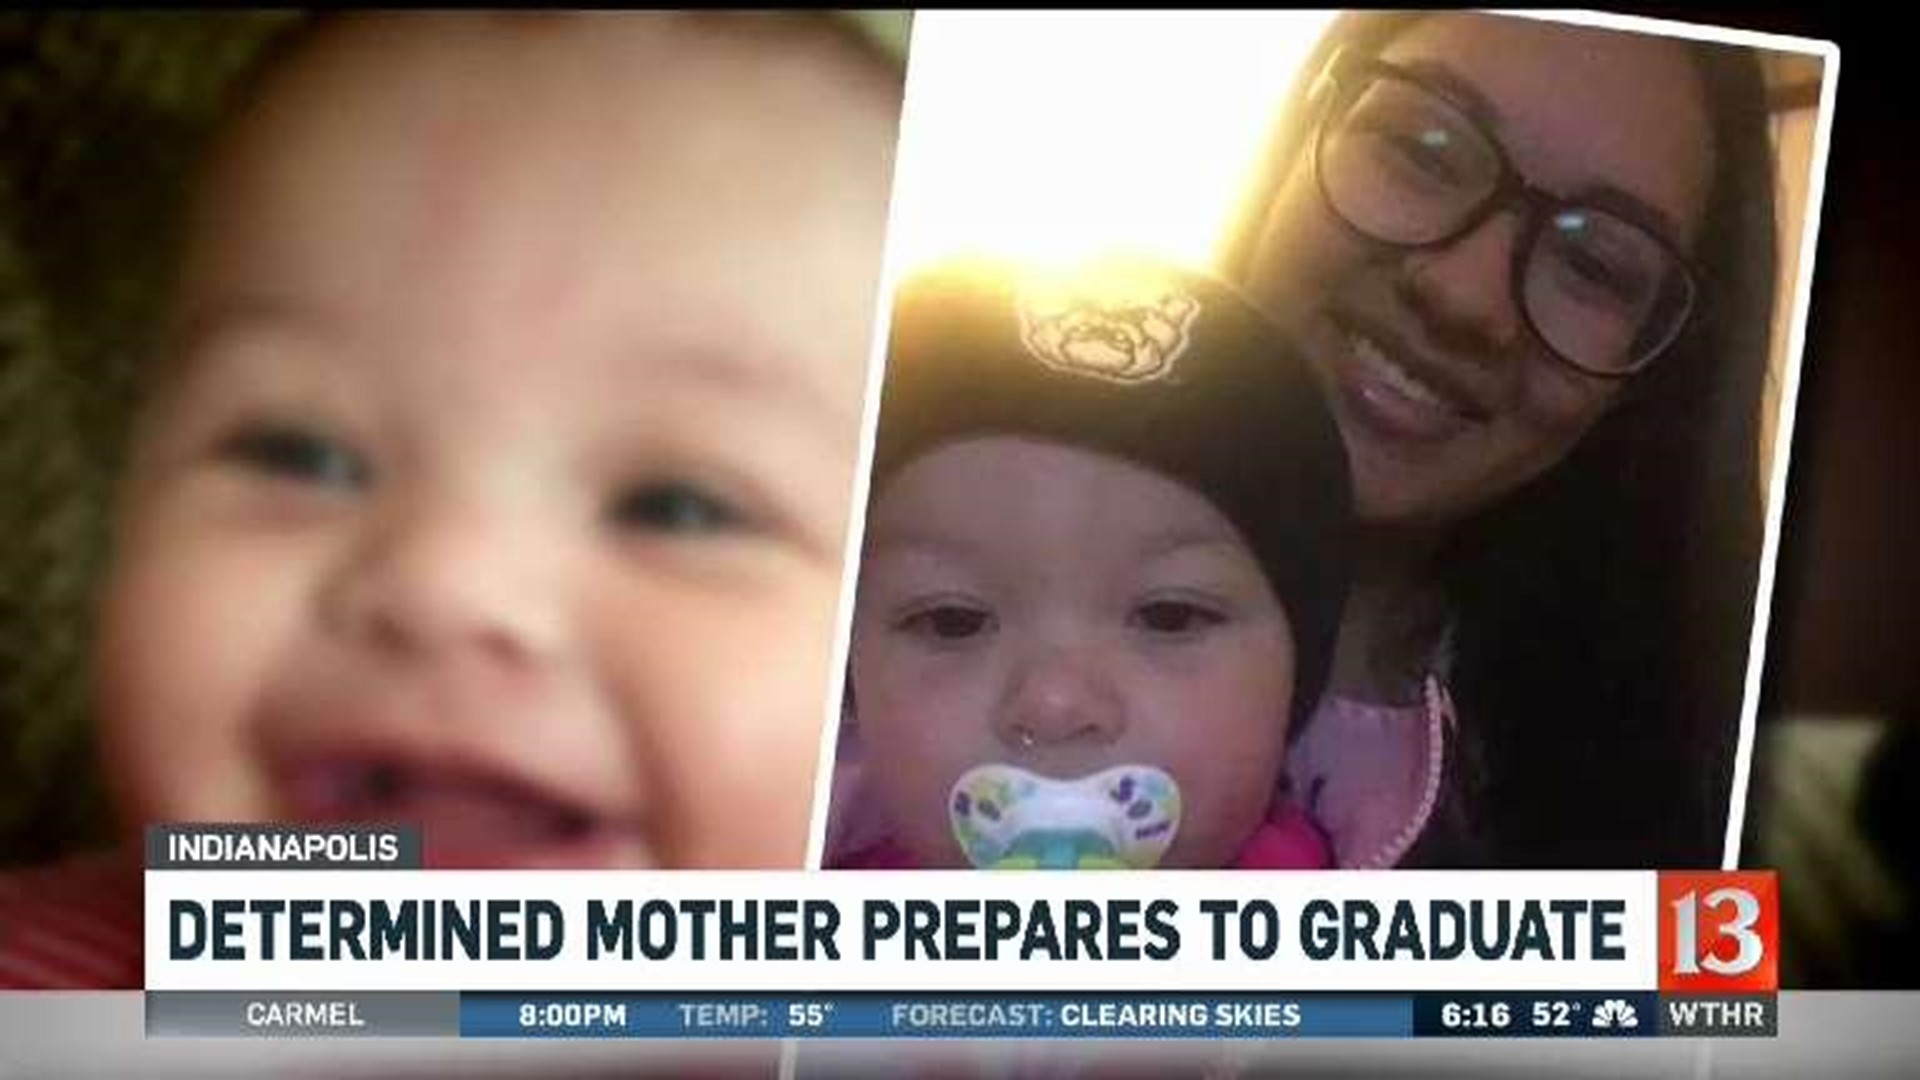 Determined mother prepares to graduate